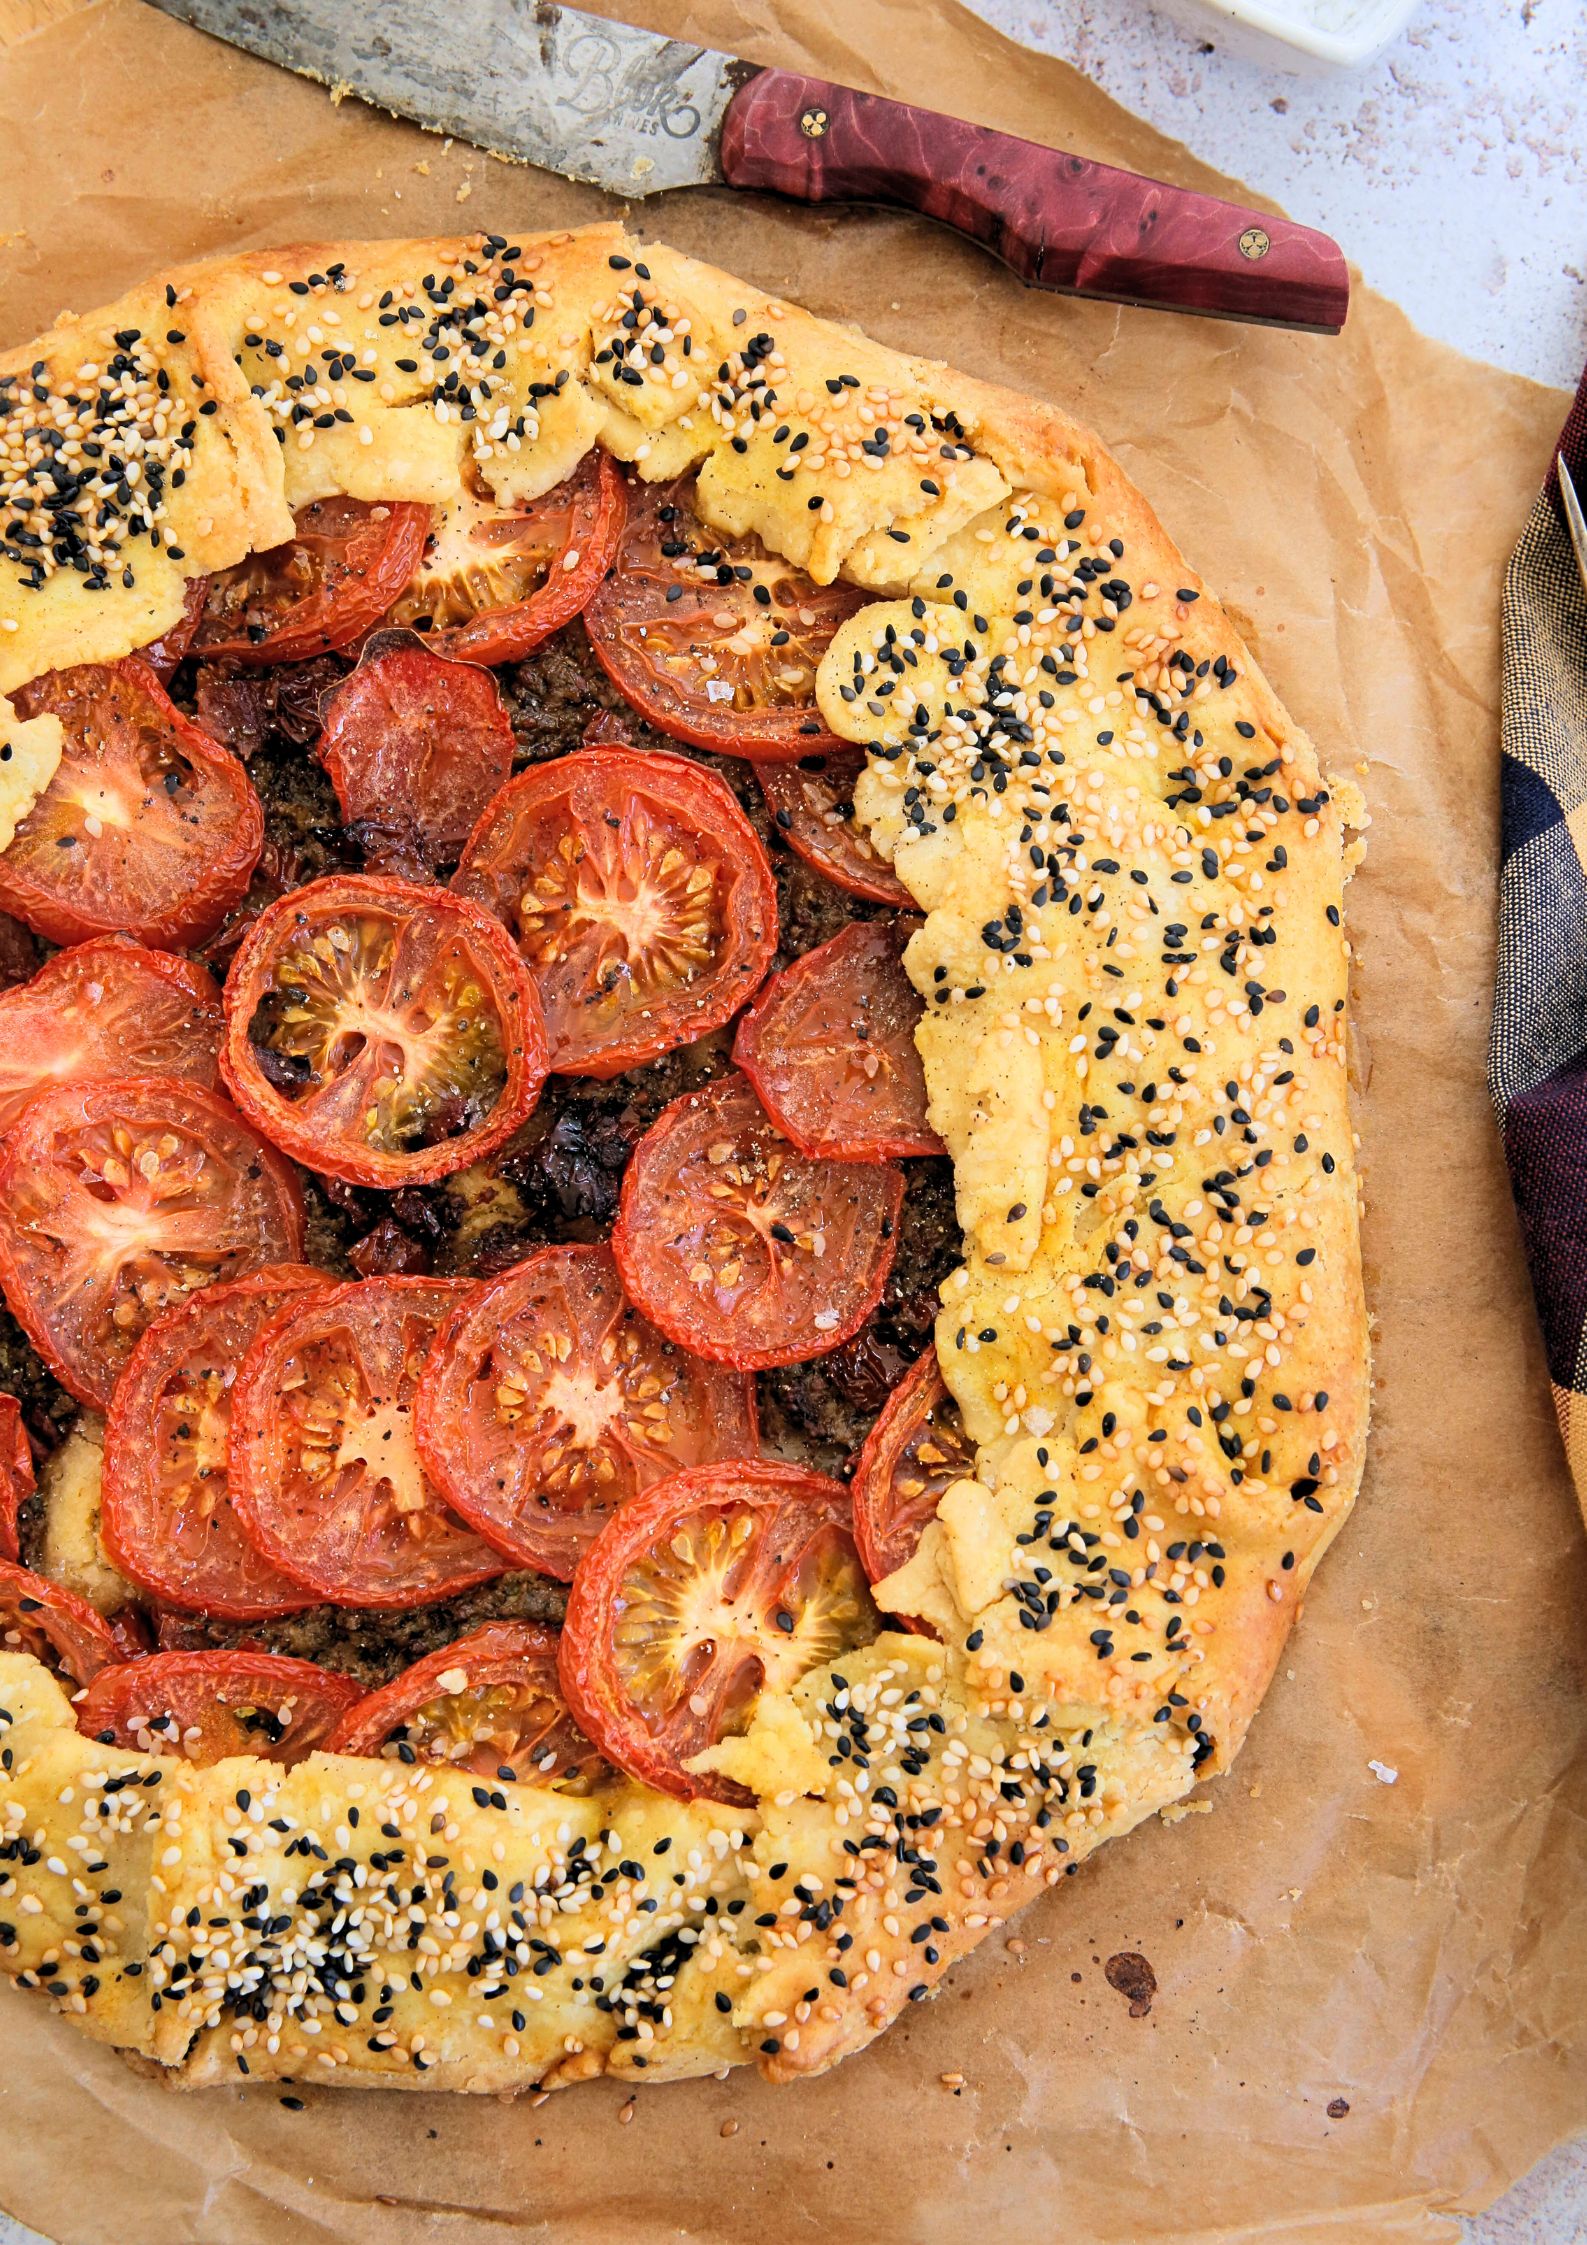 Crisp, flaky, buttery pastry, homemade pesto and sweet summer tomatoes make the perfect rustic tomato galette. This is so simple to put together but SO full of flavour! Recipe on thecookandhim.com | #tomatogalette #tomatotart #easysummerrecipes #tomatoes #tomatorecipes #vegan #pesto